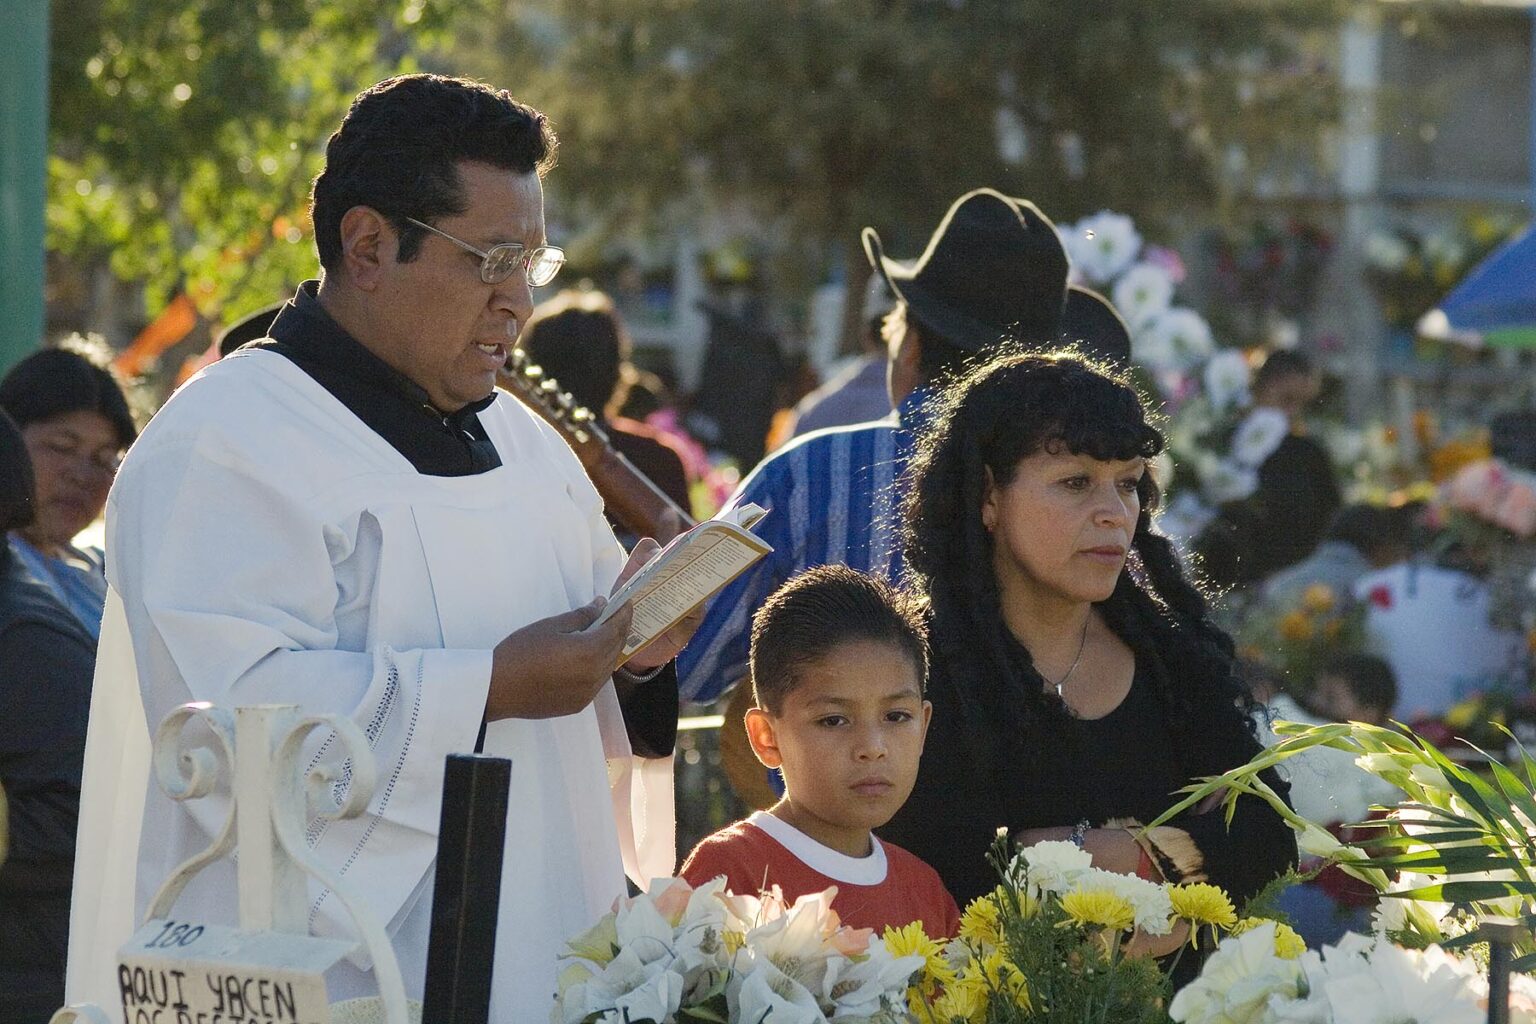 A PRIEST says prayers over a grave during the DEAD OF THE DEAD - SAN MIGUEL DE ALLENDE, MEXICO